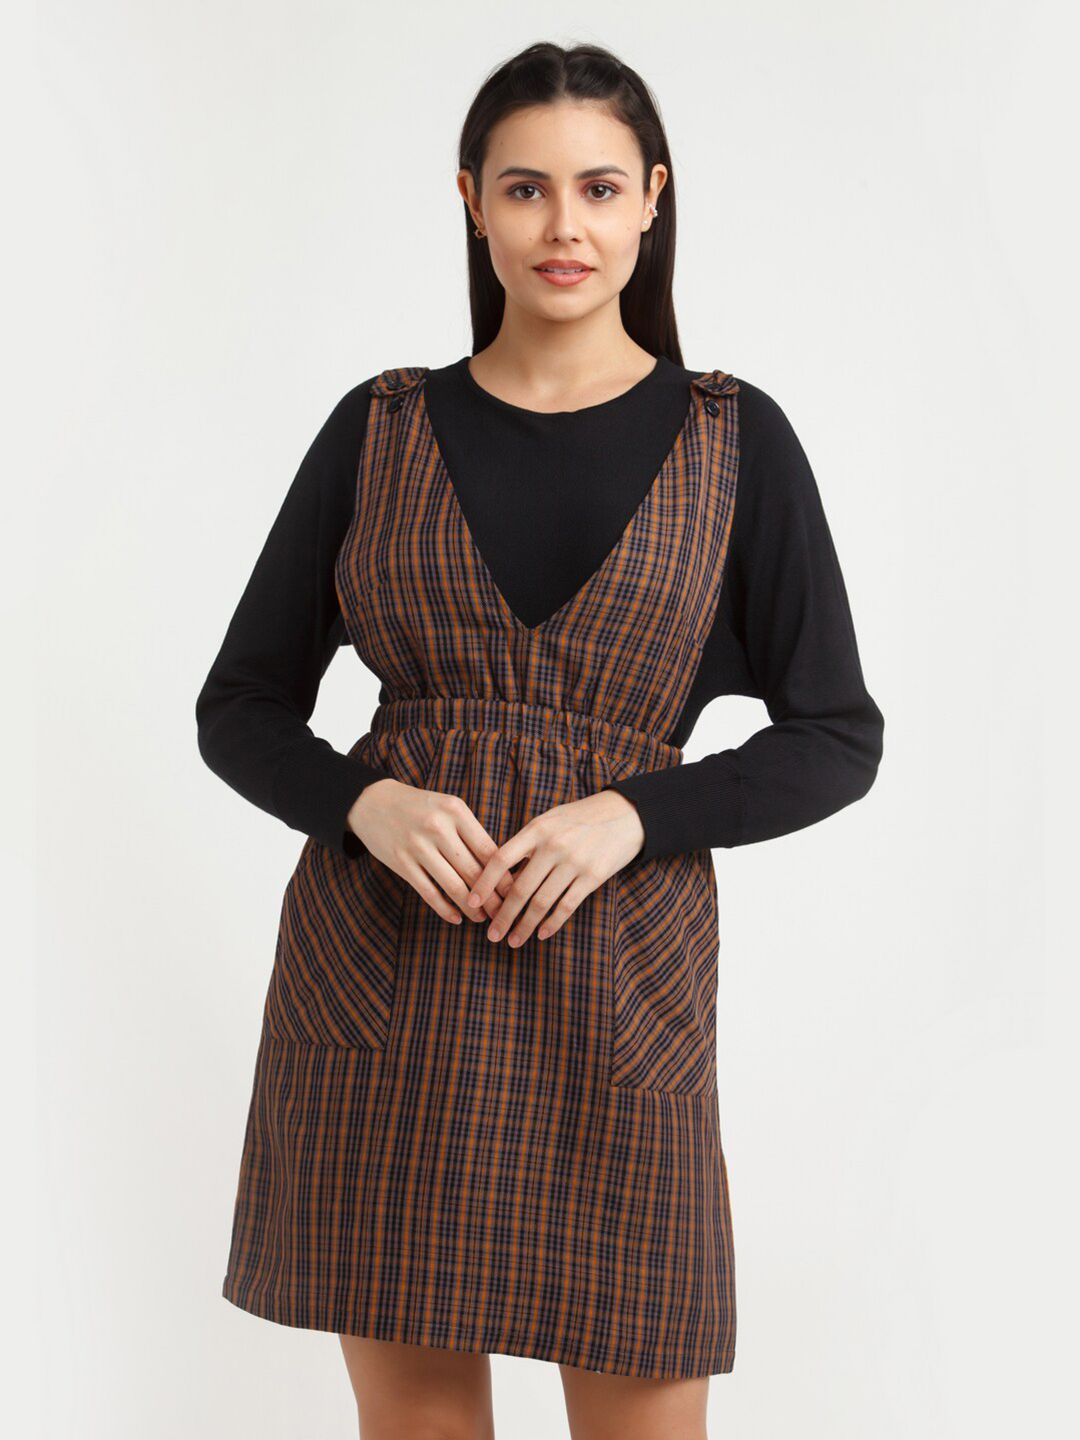 Zink London Black Striped Pinafore Dress Price in India